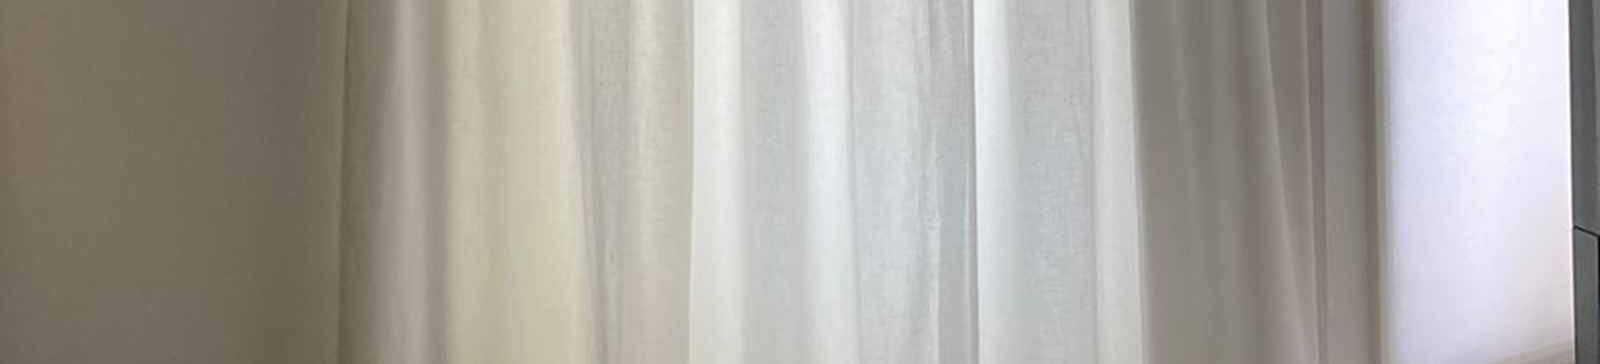 Custom Motorized Curtains Installation in Daly City